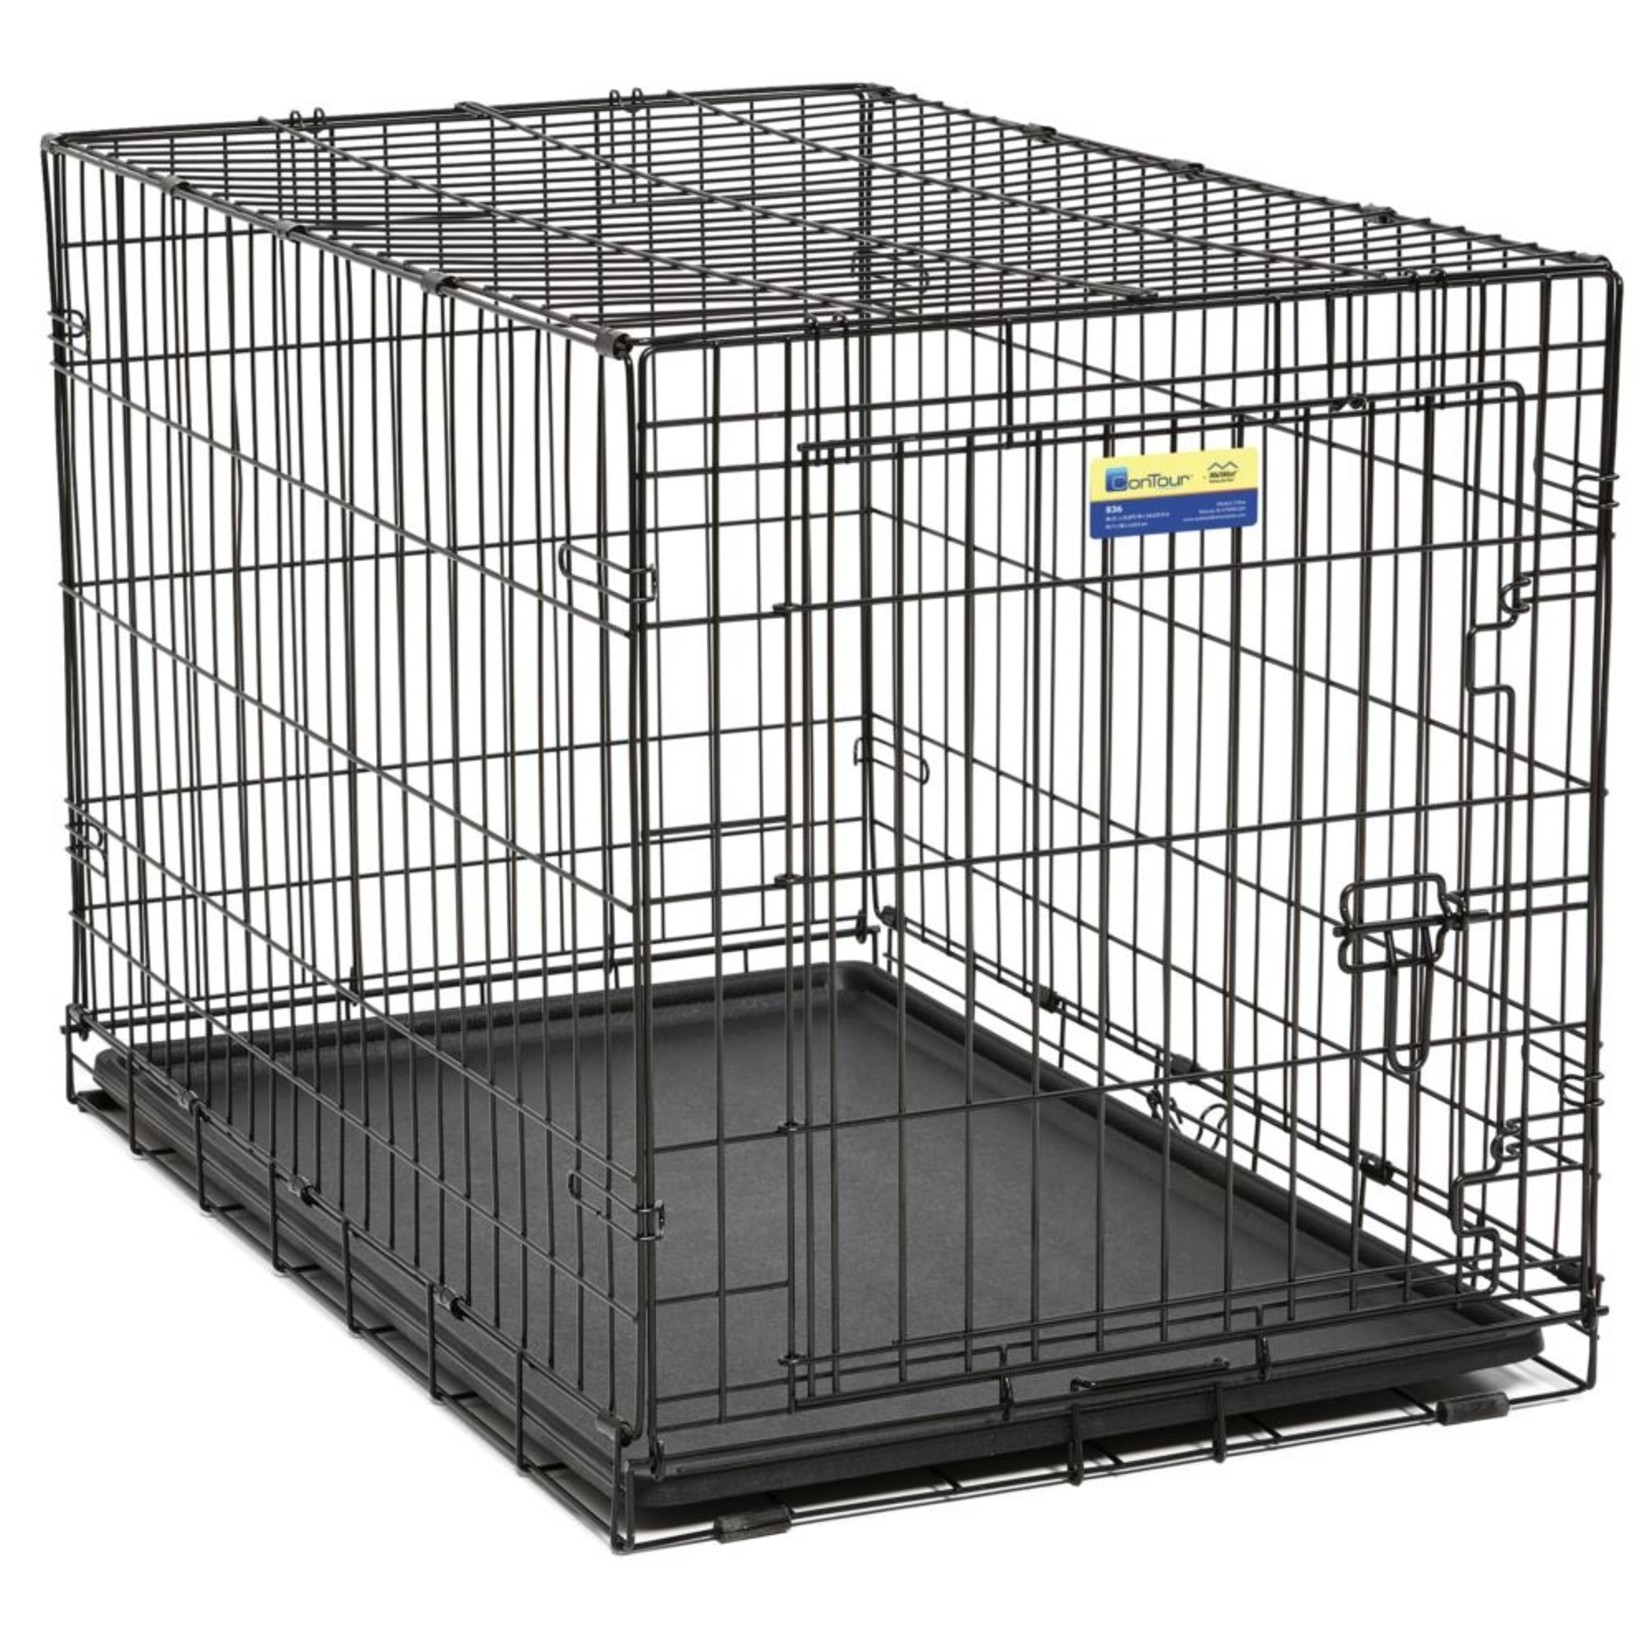 Midwest Homes for Pets Midwest Homes for Pets Contour Dog Crate 36in